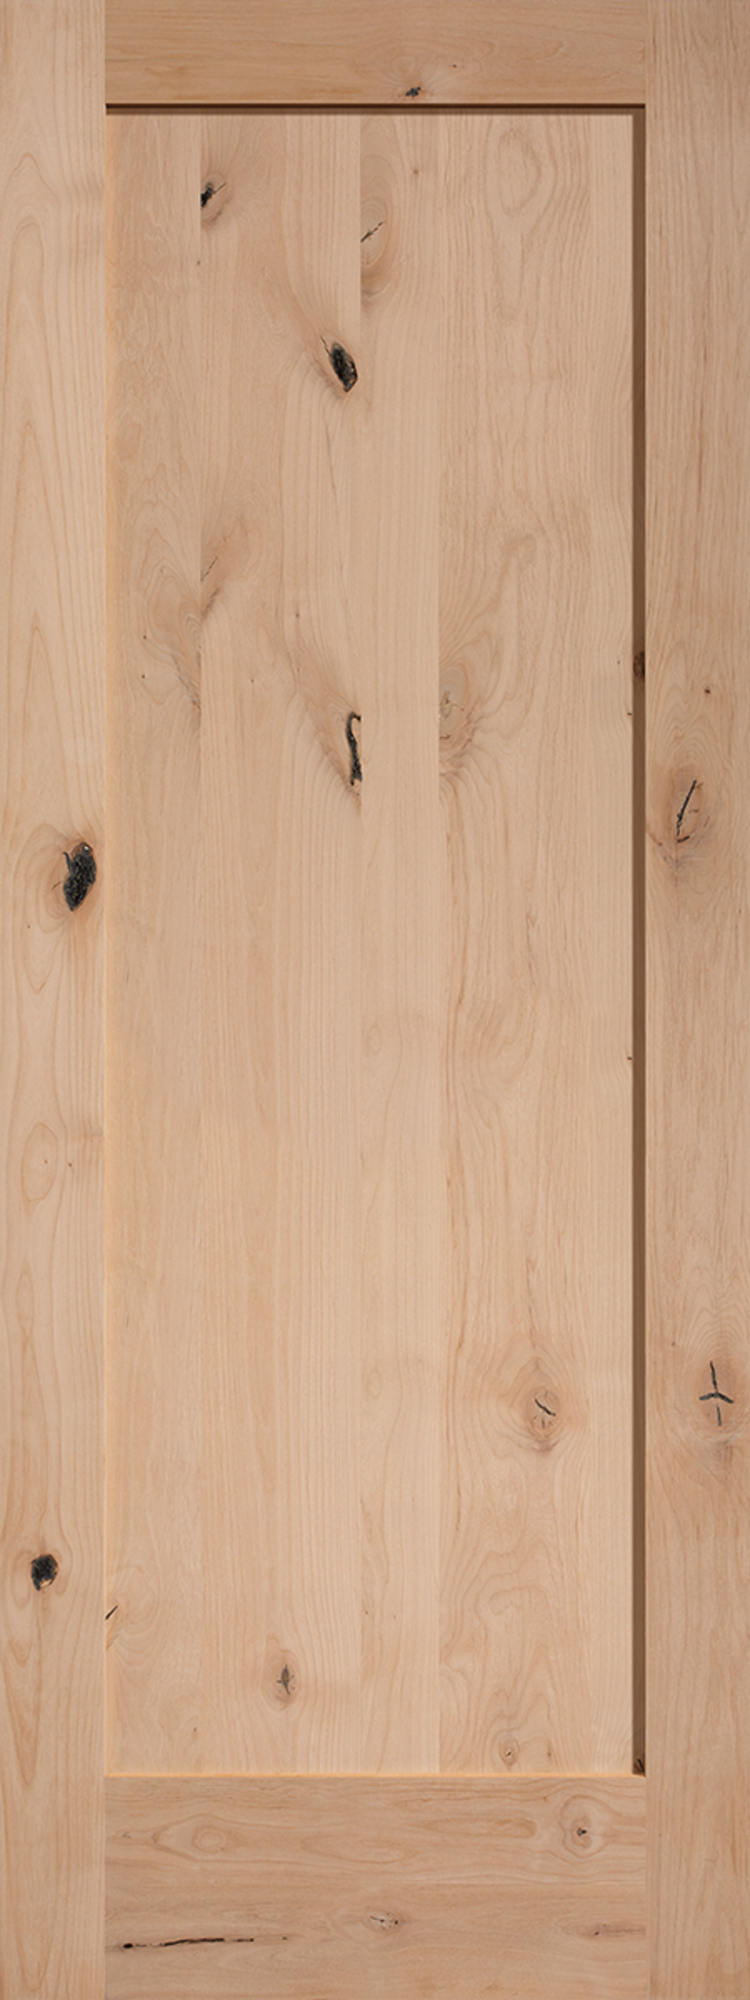 Knotty alder door consists of wood from alder trees with knotted areas within the wood, and a one-panel Shaker design